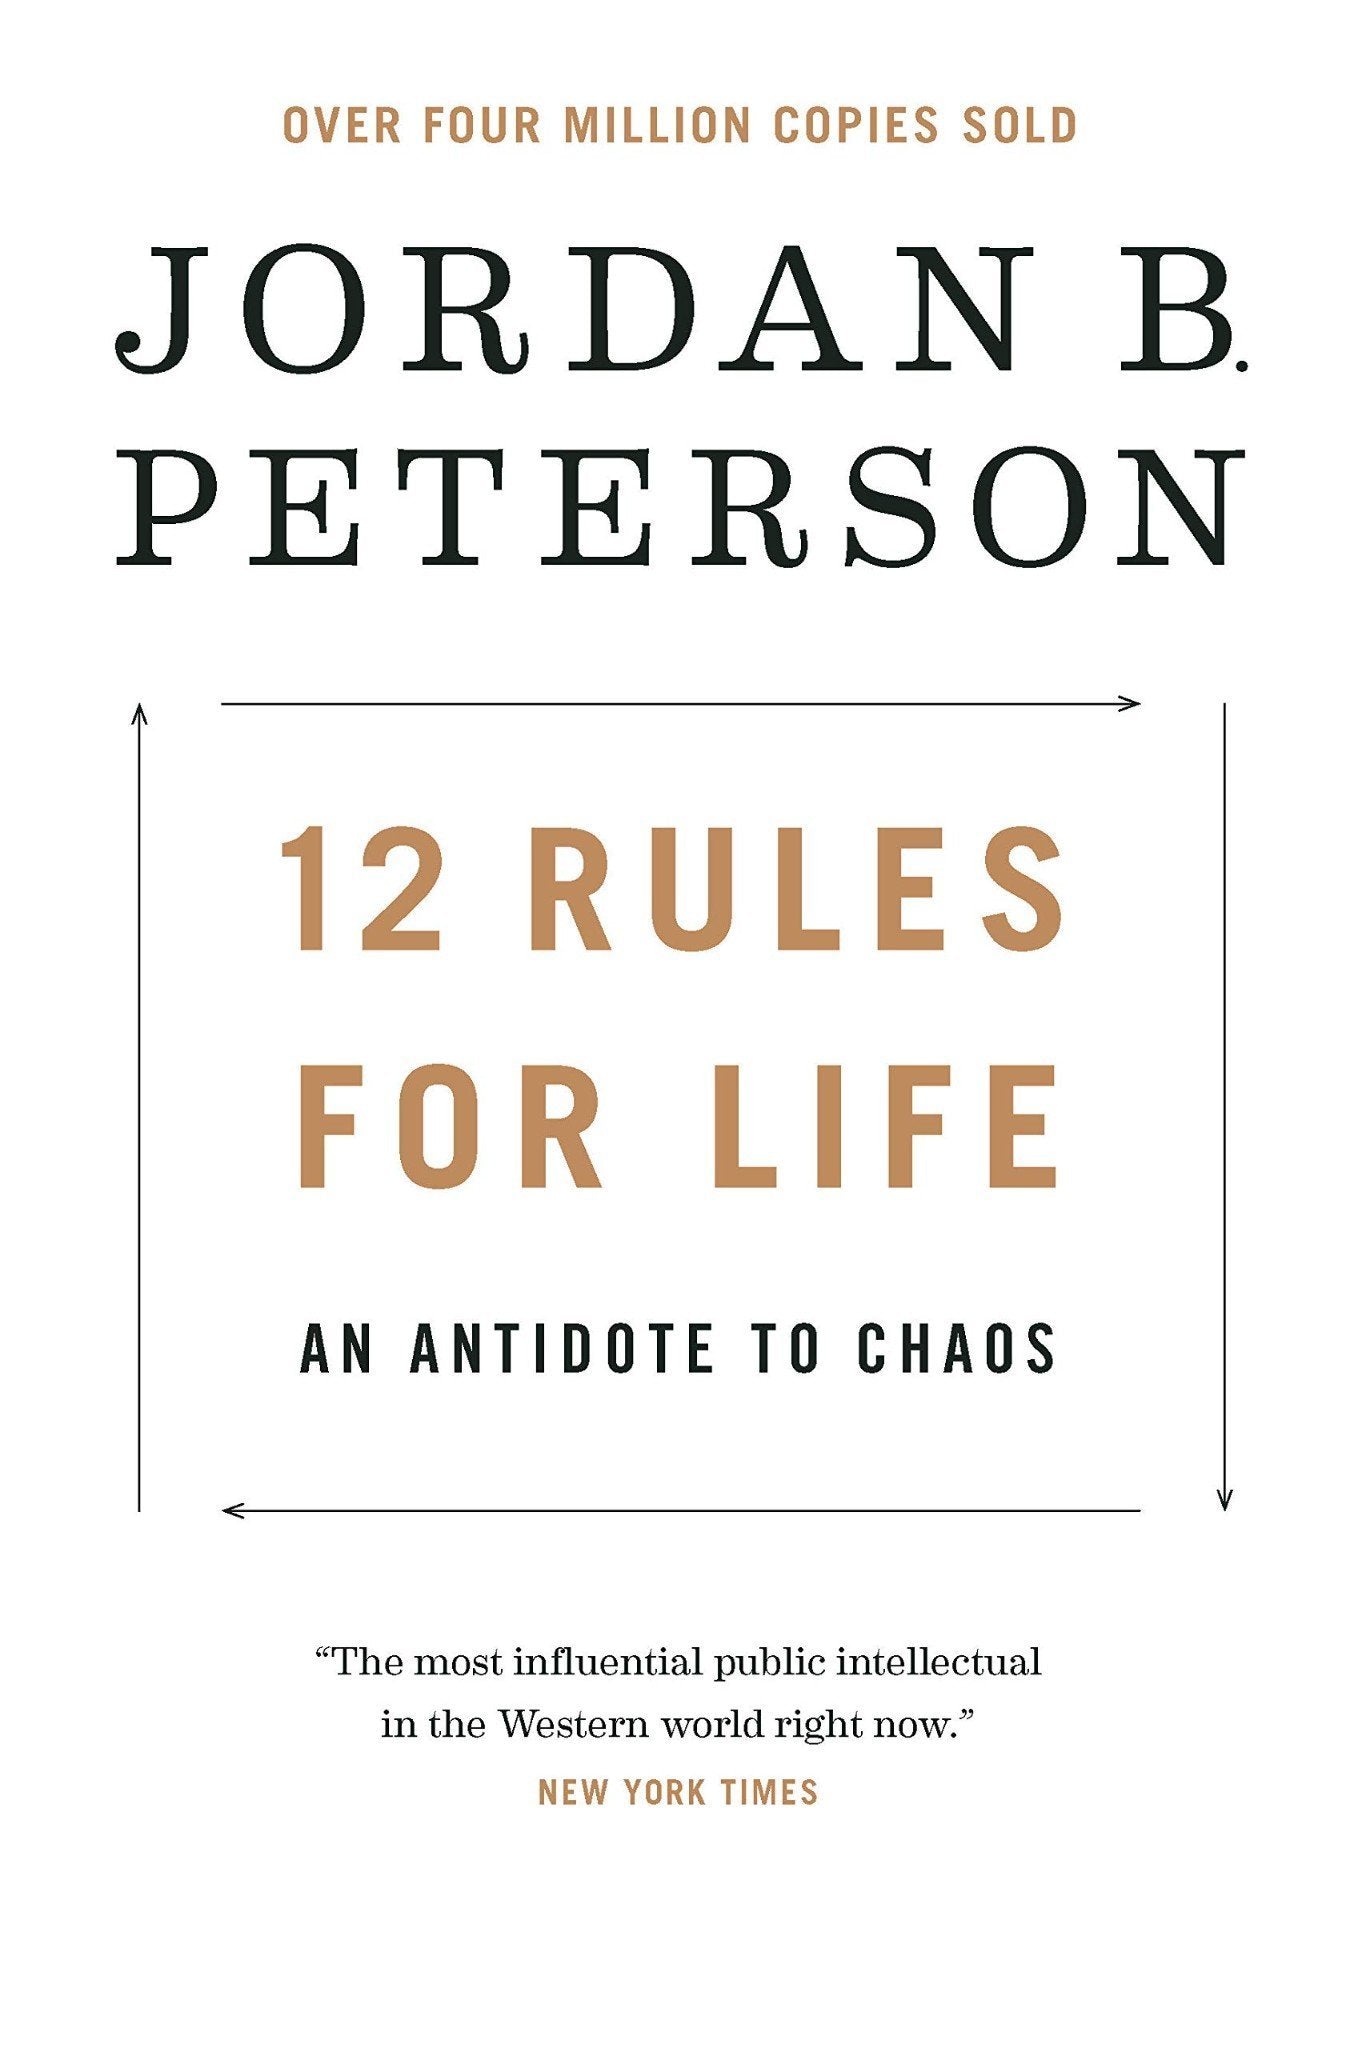 12 Rules for Life by Jordan B. Peterson [Hardcover] - LV'S Global Media